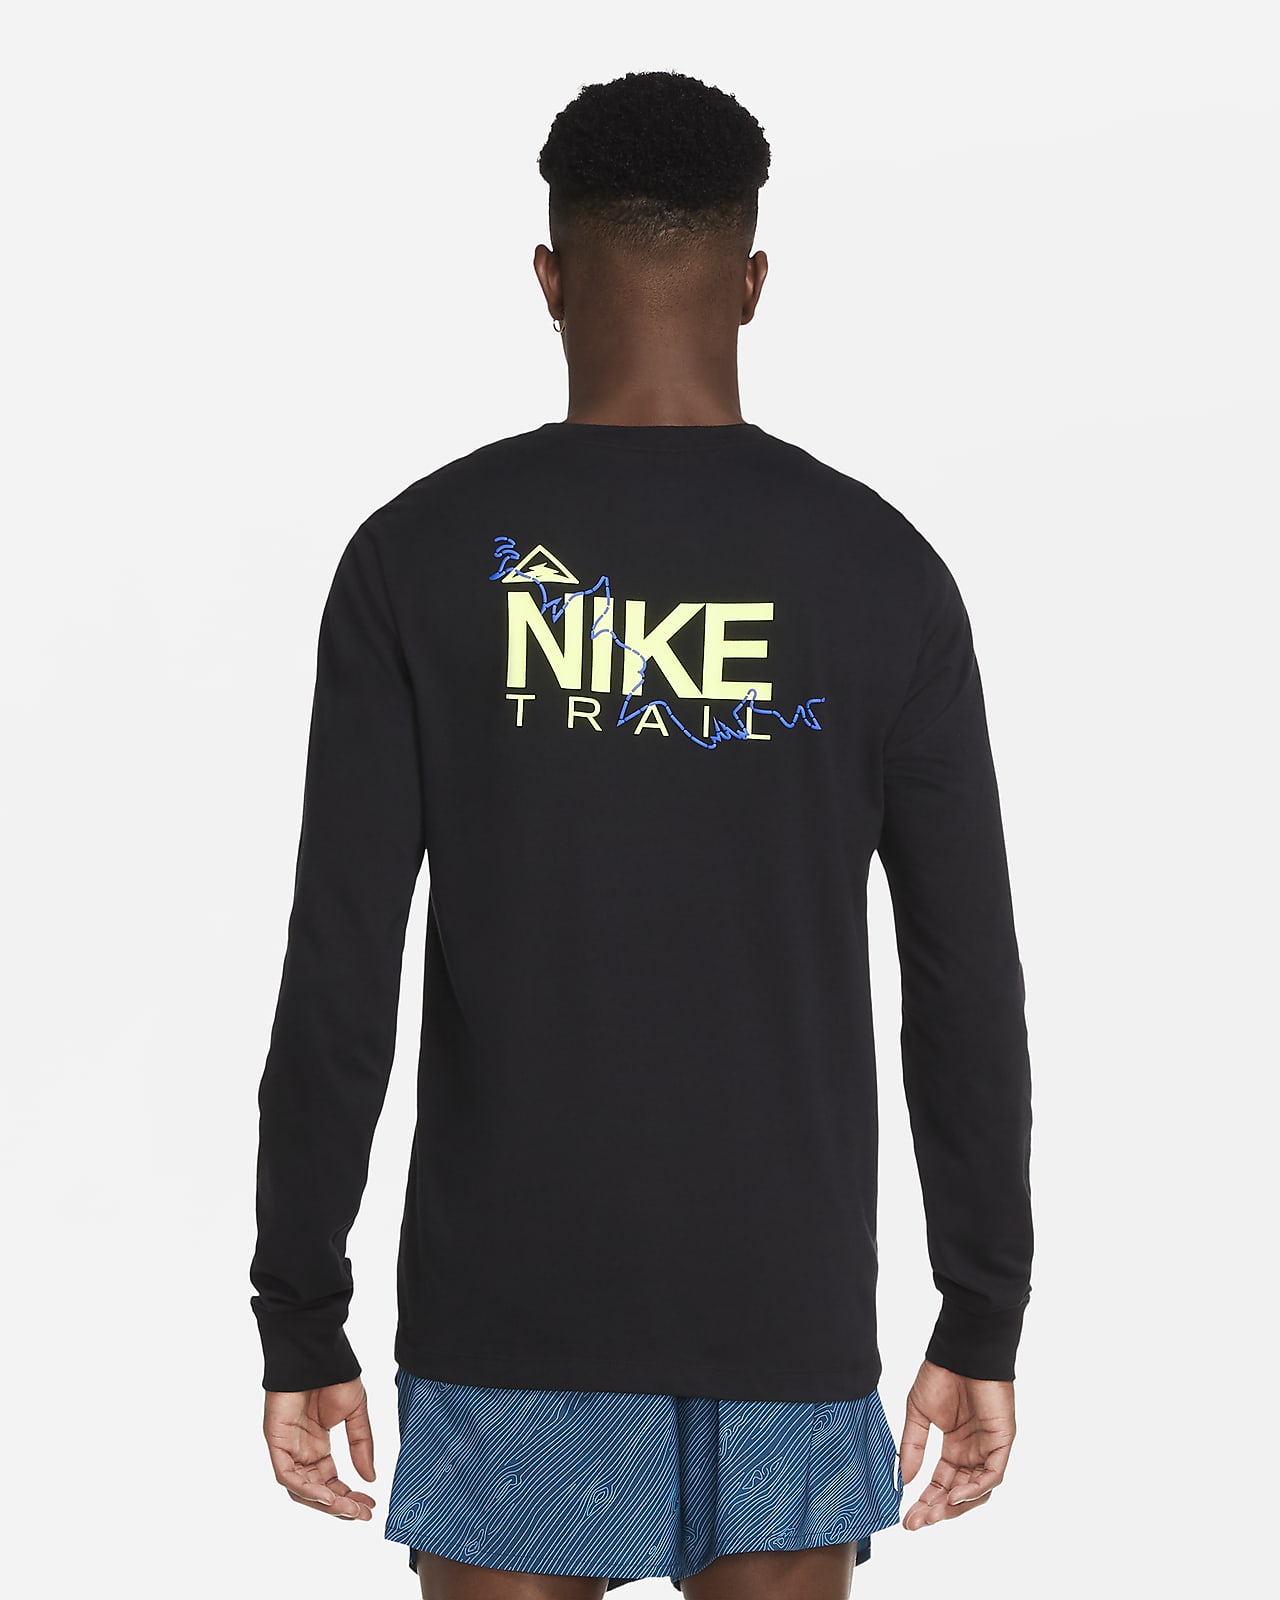 nike trail running clothes